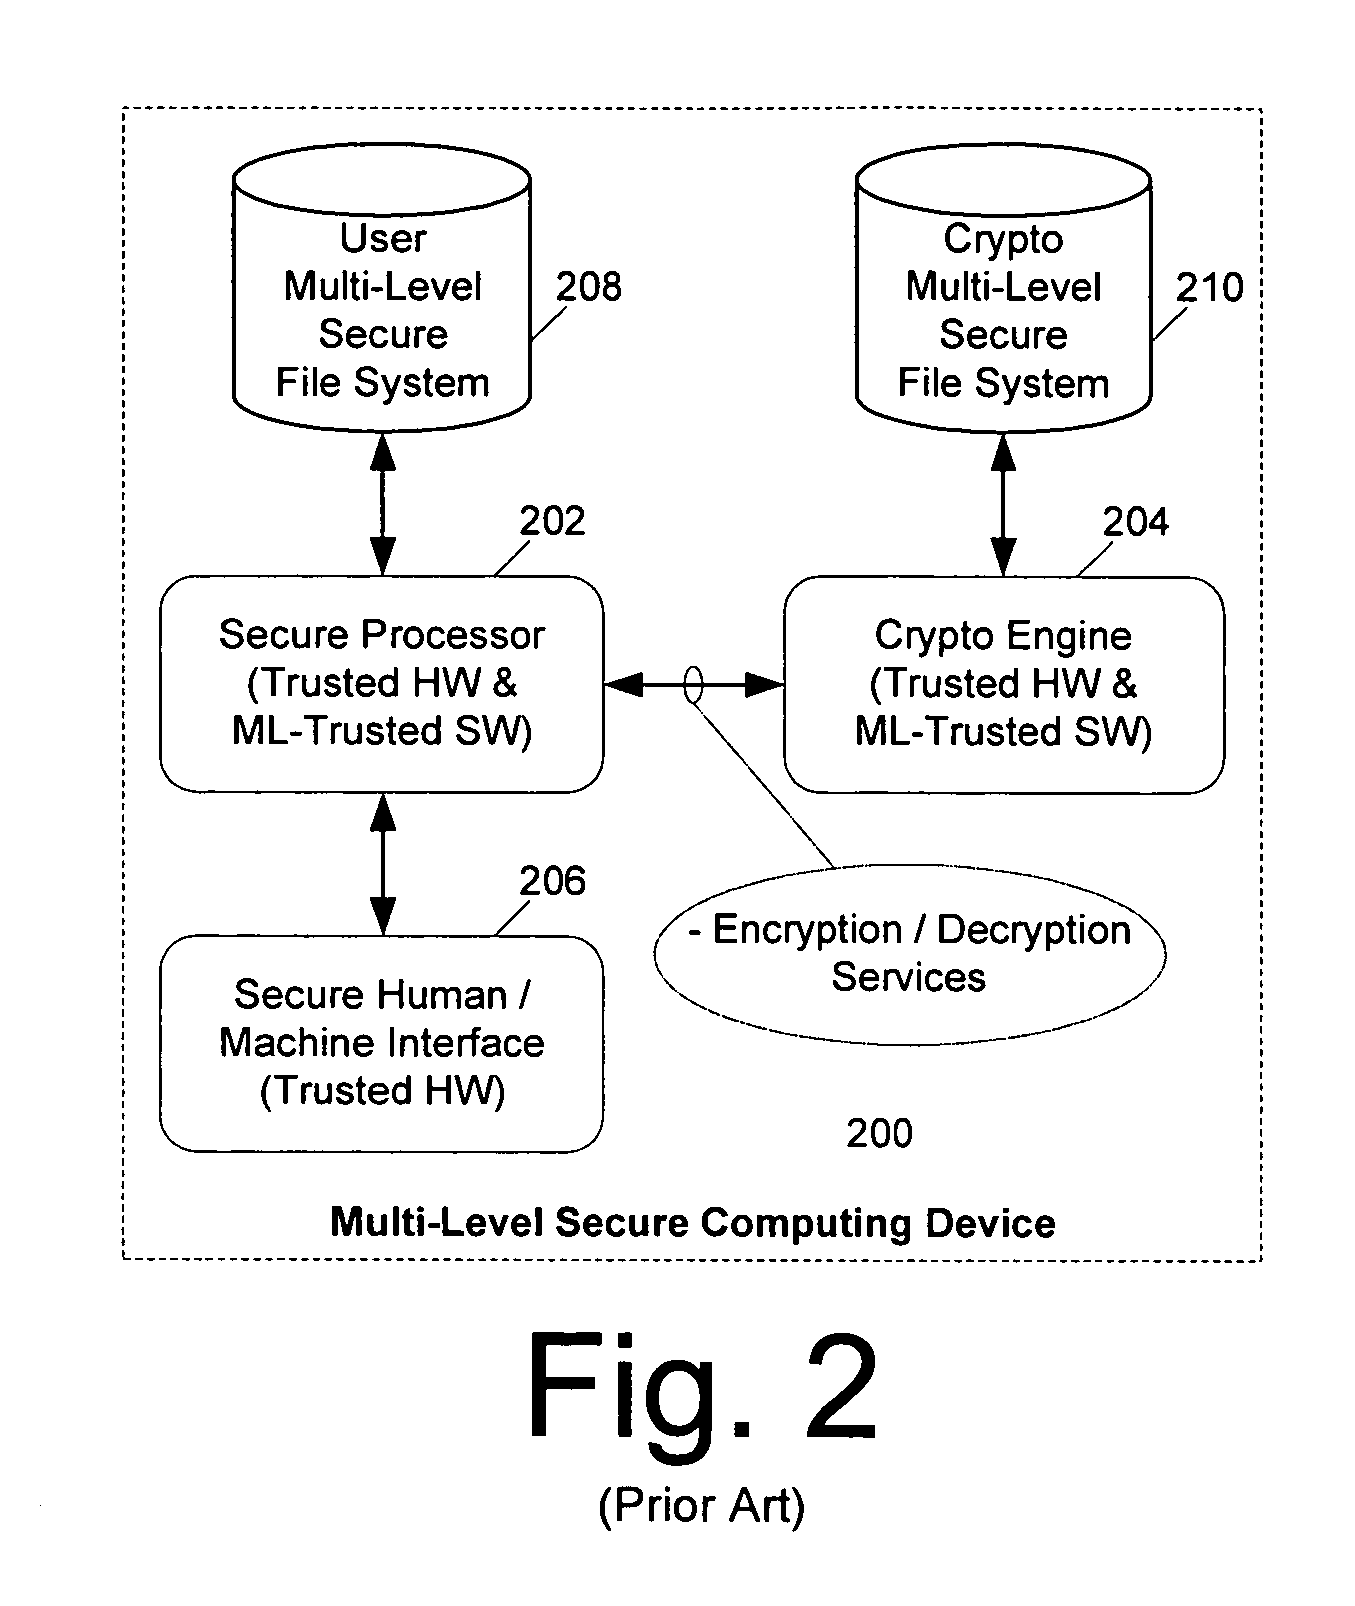 Computer architecture for an electronic device providing a secure file system